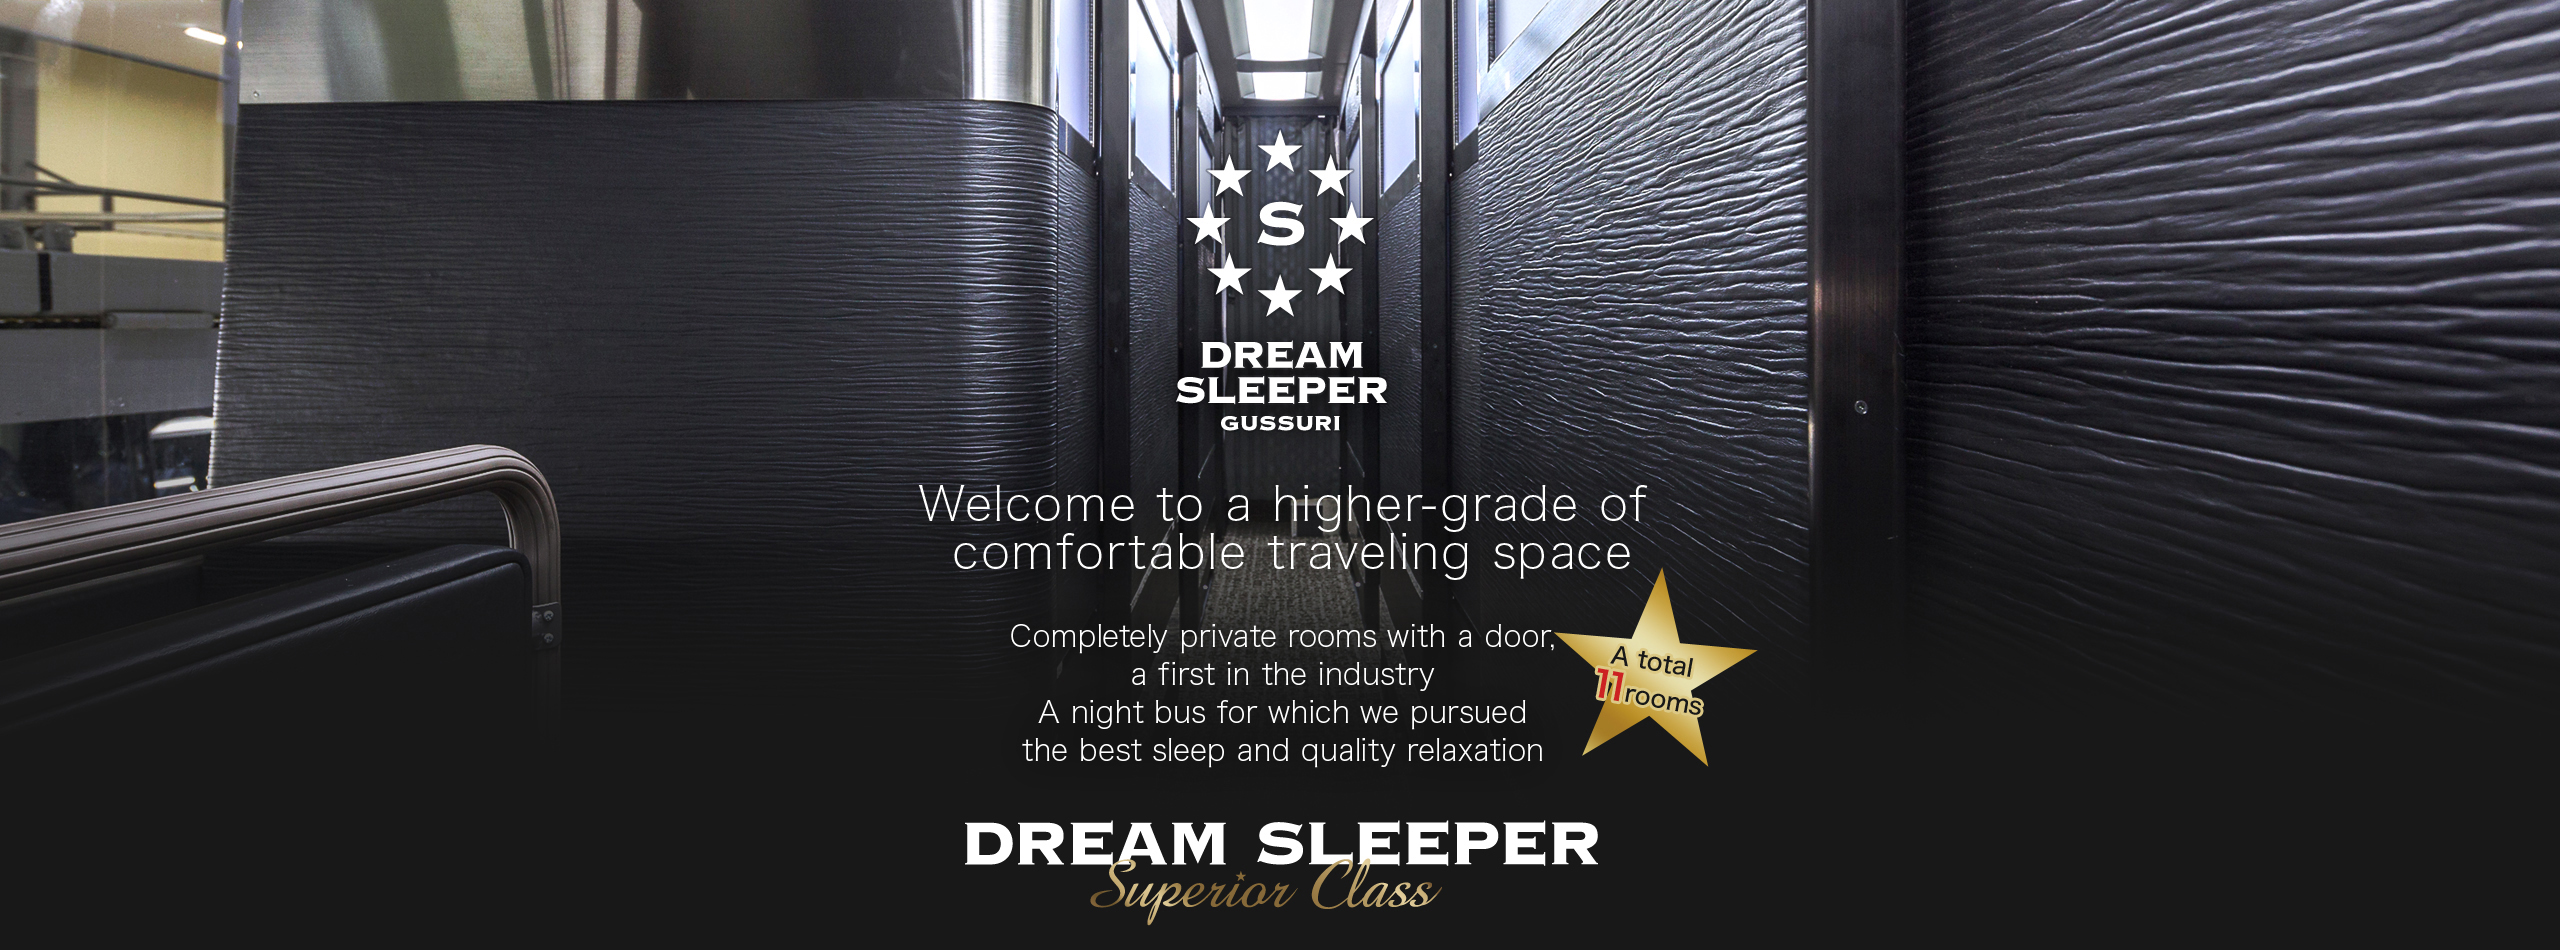 Welcome to a higher-grade of comfortable traveling space